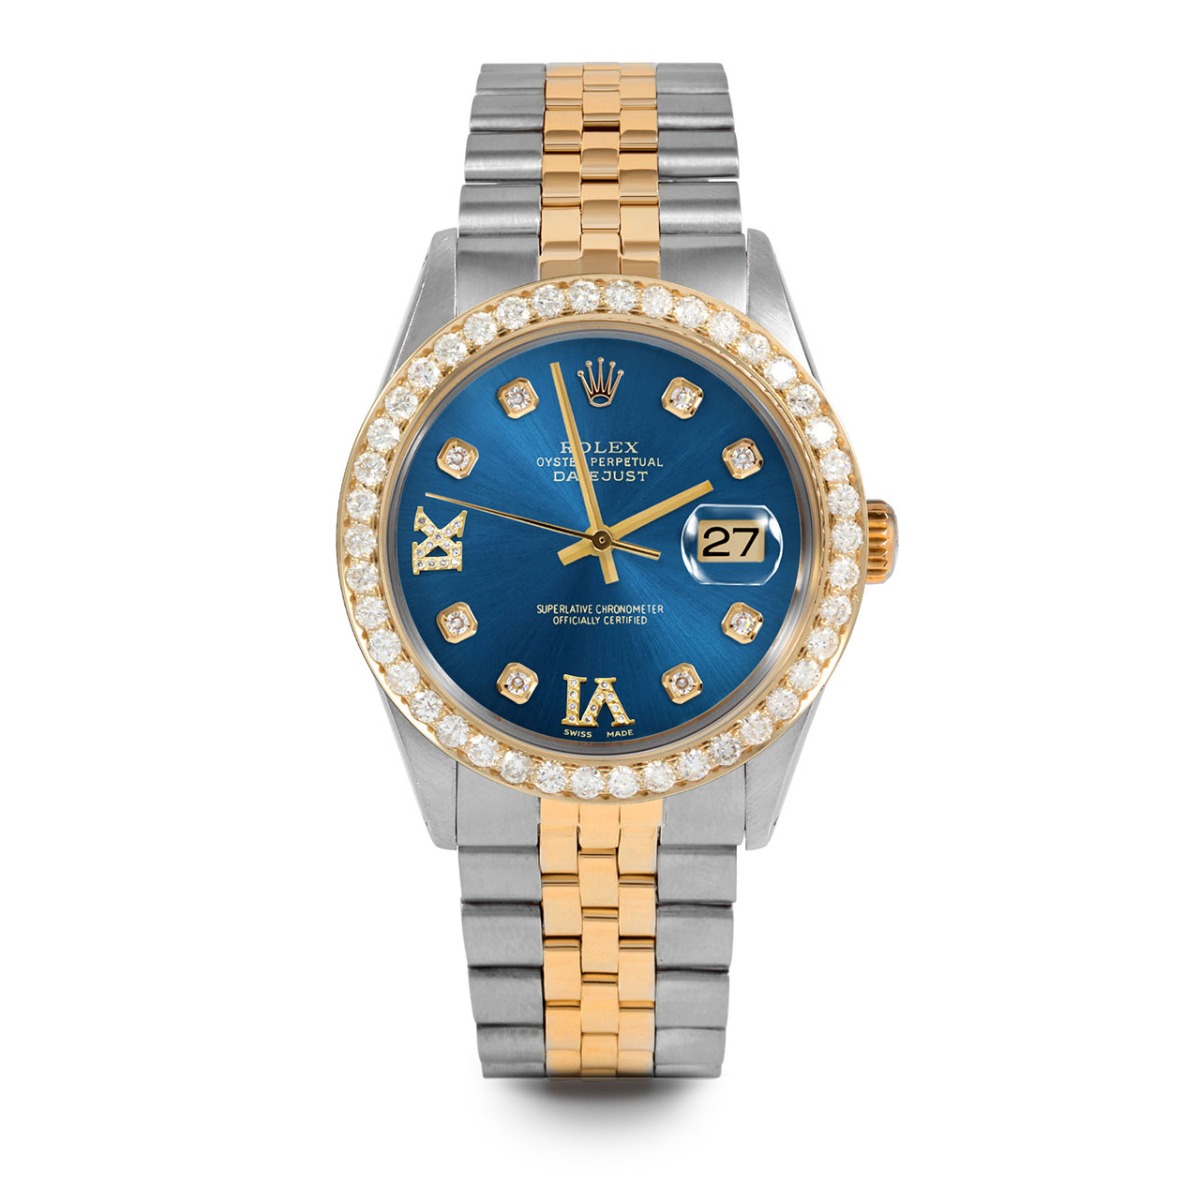 Rolex Watch Datejust with Blue Face